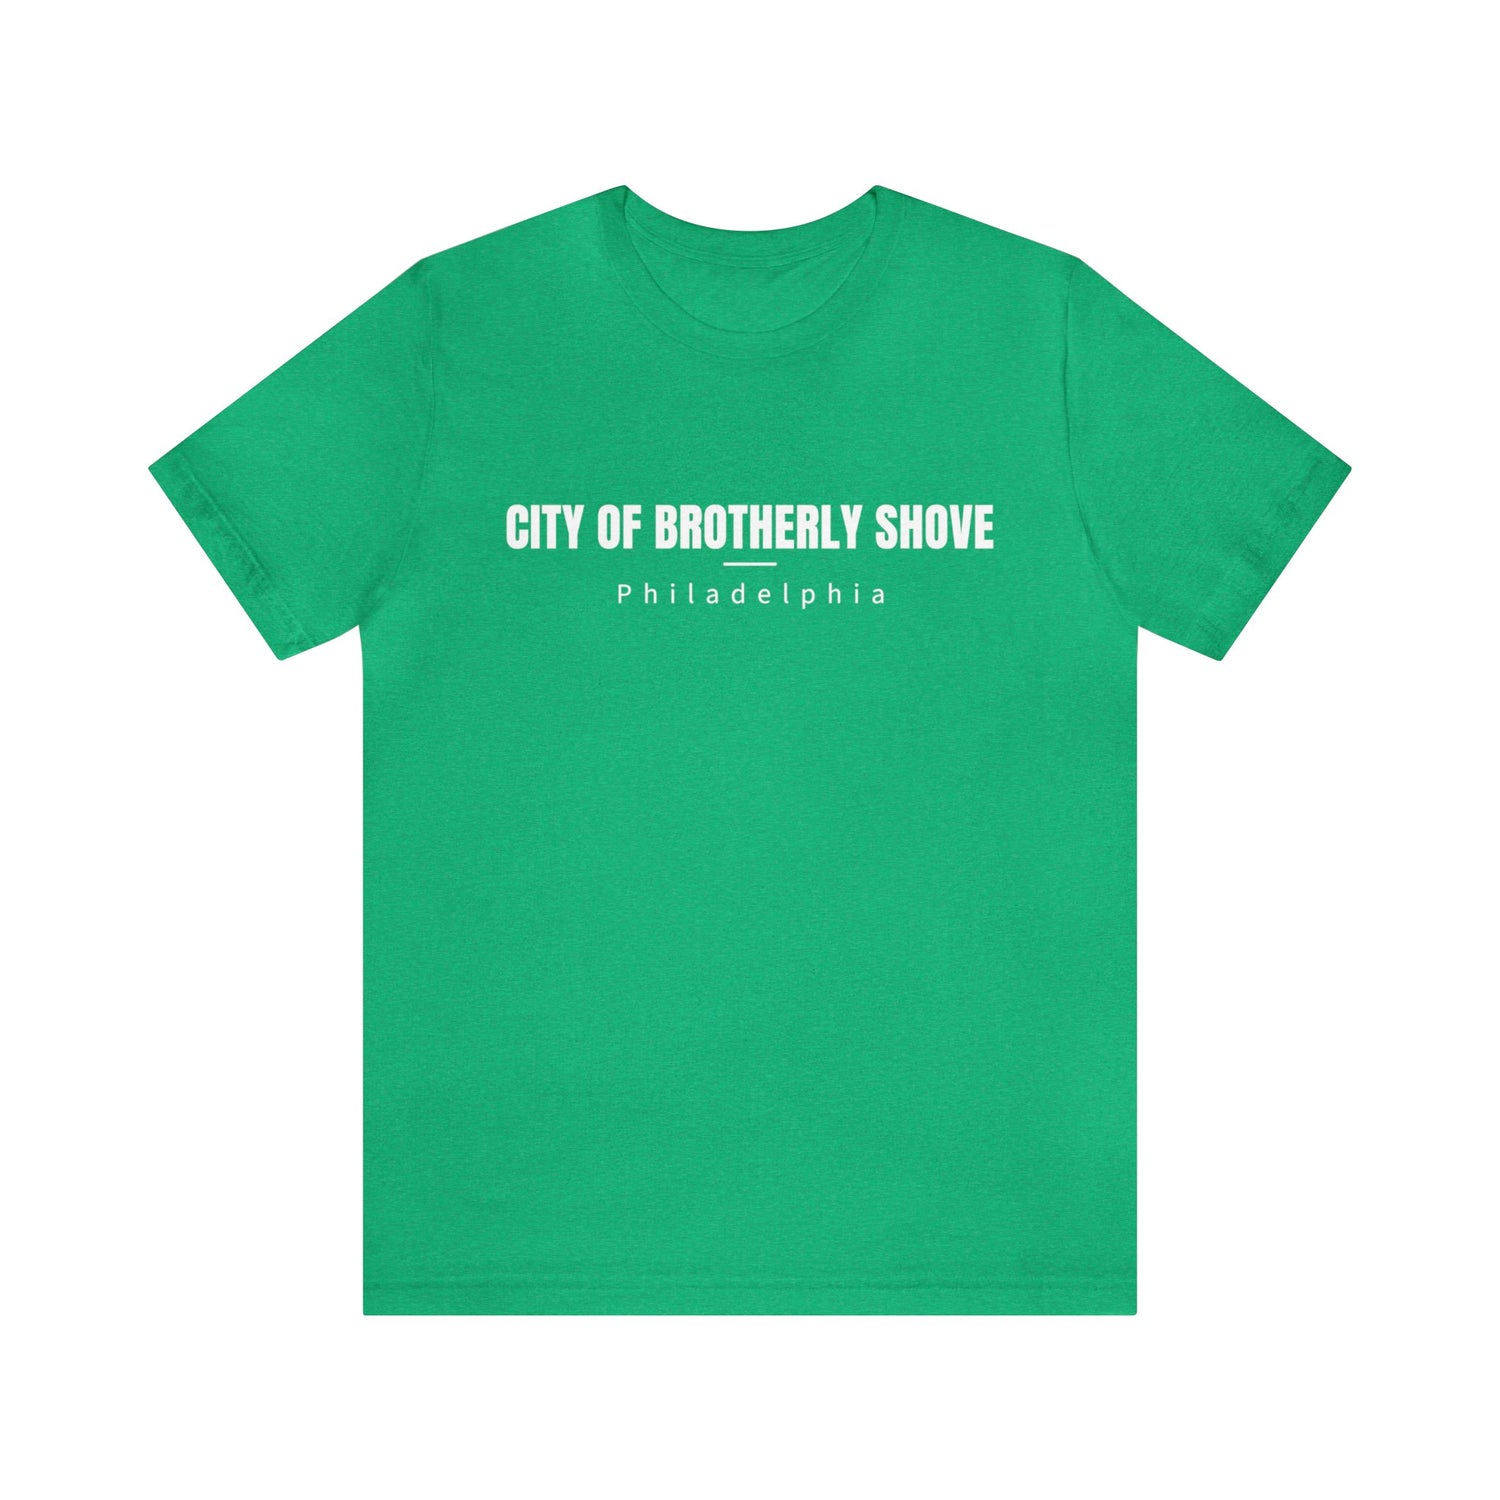 The City of Brotherly Shove Kelly Green Tshirt - Home Field Fan